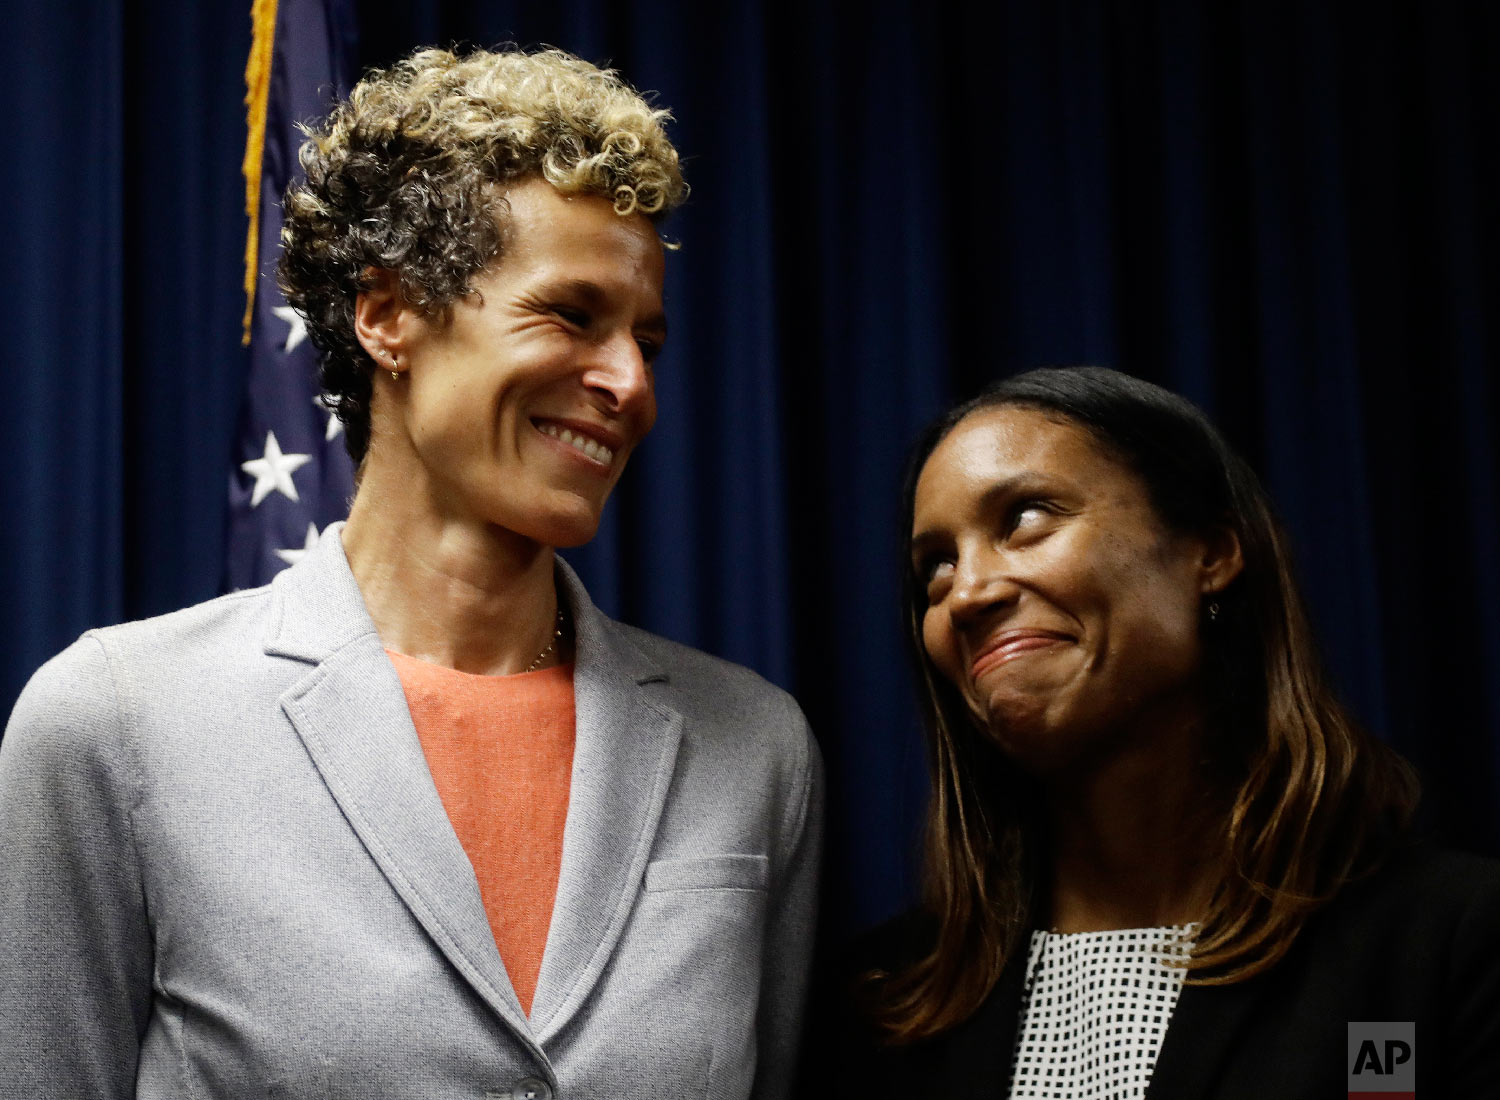  Accuser Andrea Constand, left, reacts at a news conference with prosecutor Kristen Feden after Bill Cosby was sentenced to three to 10 years for sexual assault on Sept. 25, 2018, in Norristown, Pa. (AP Photo/Matt Slocum) 